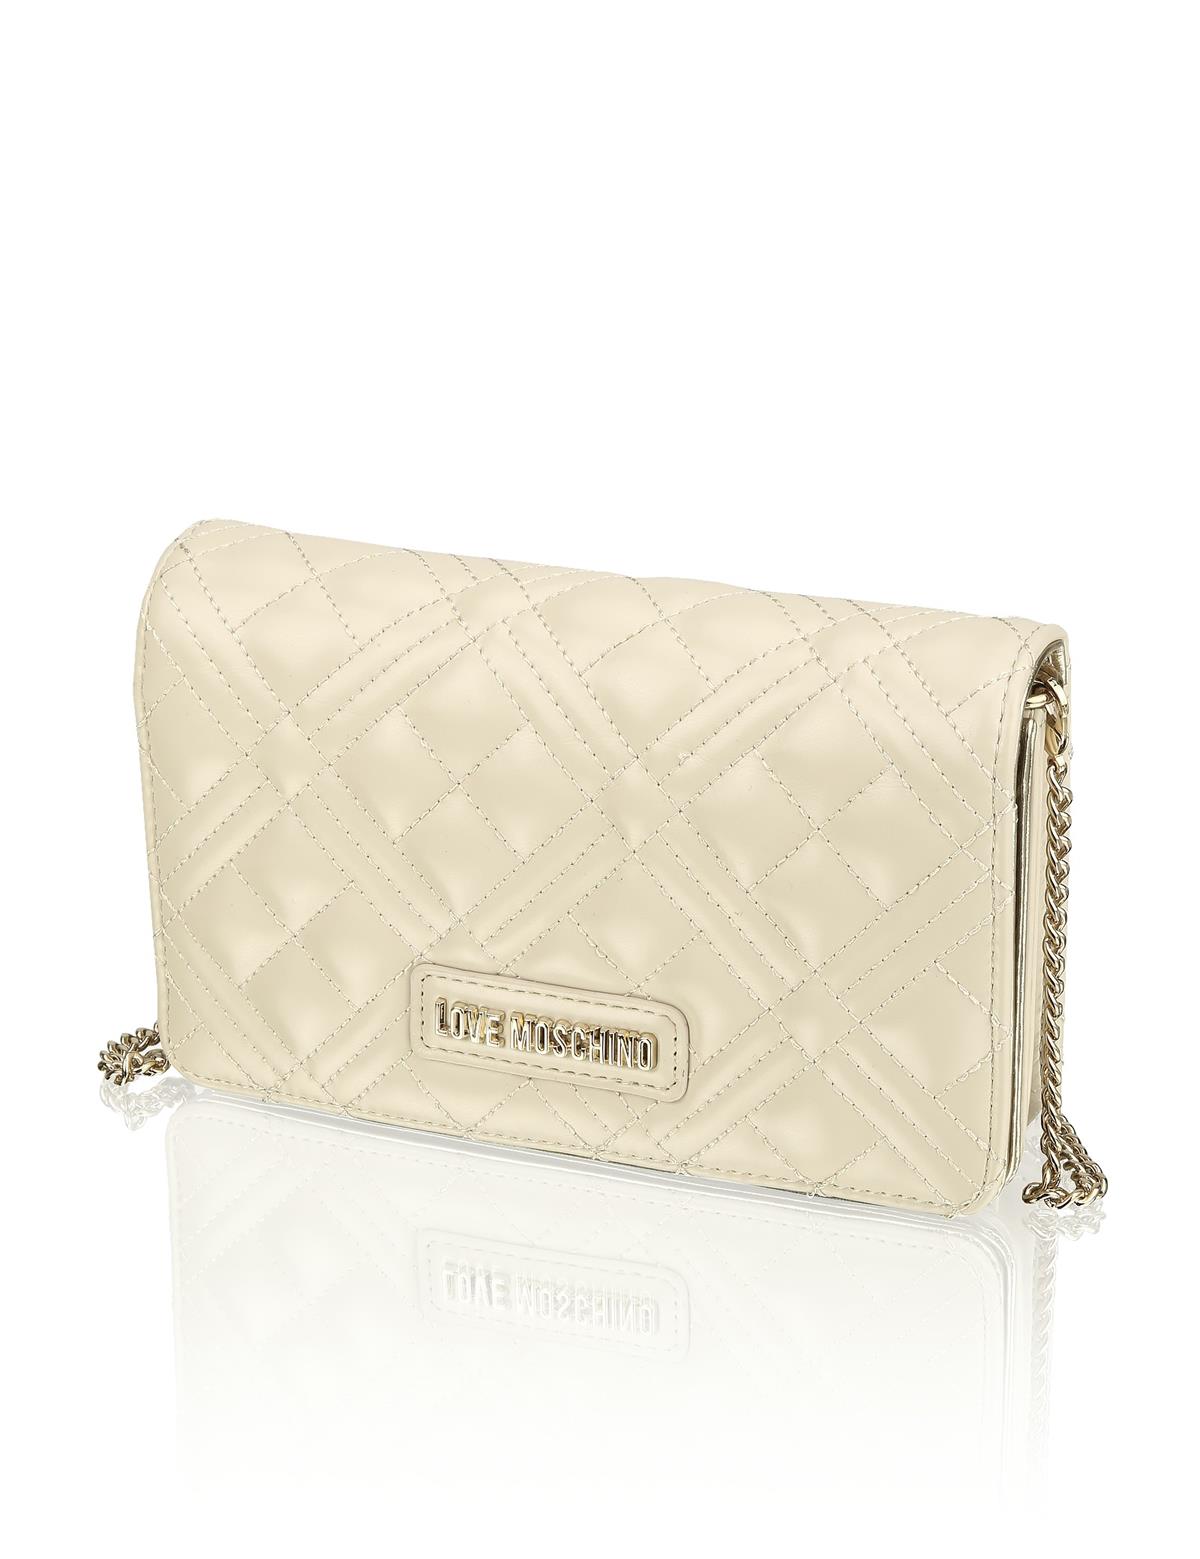 HUMANIC 25 Love Moschino Quilted Bag EUR 130 6131402186